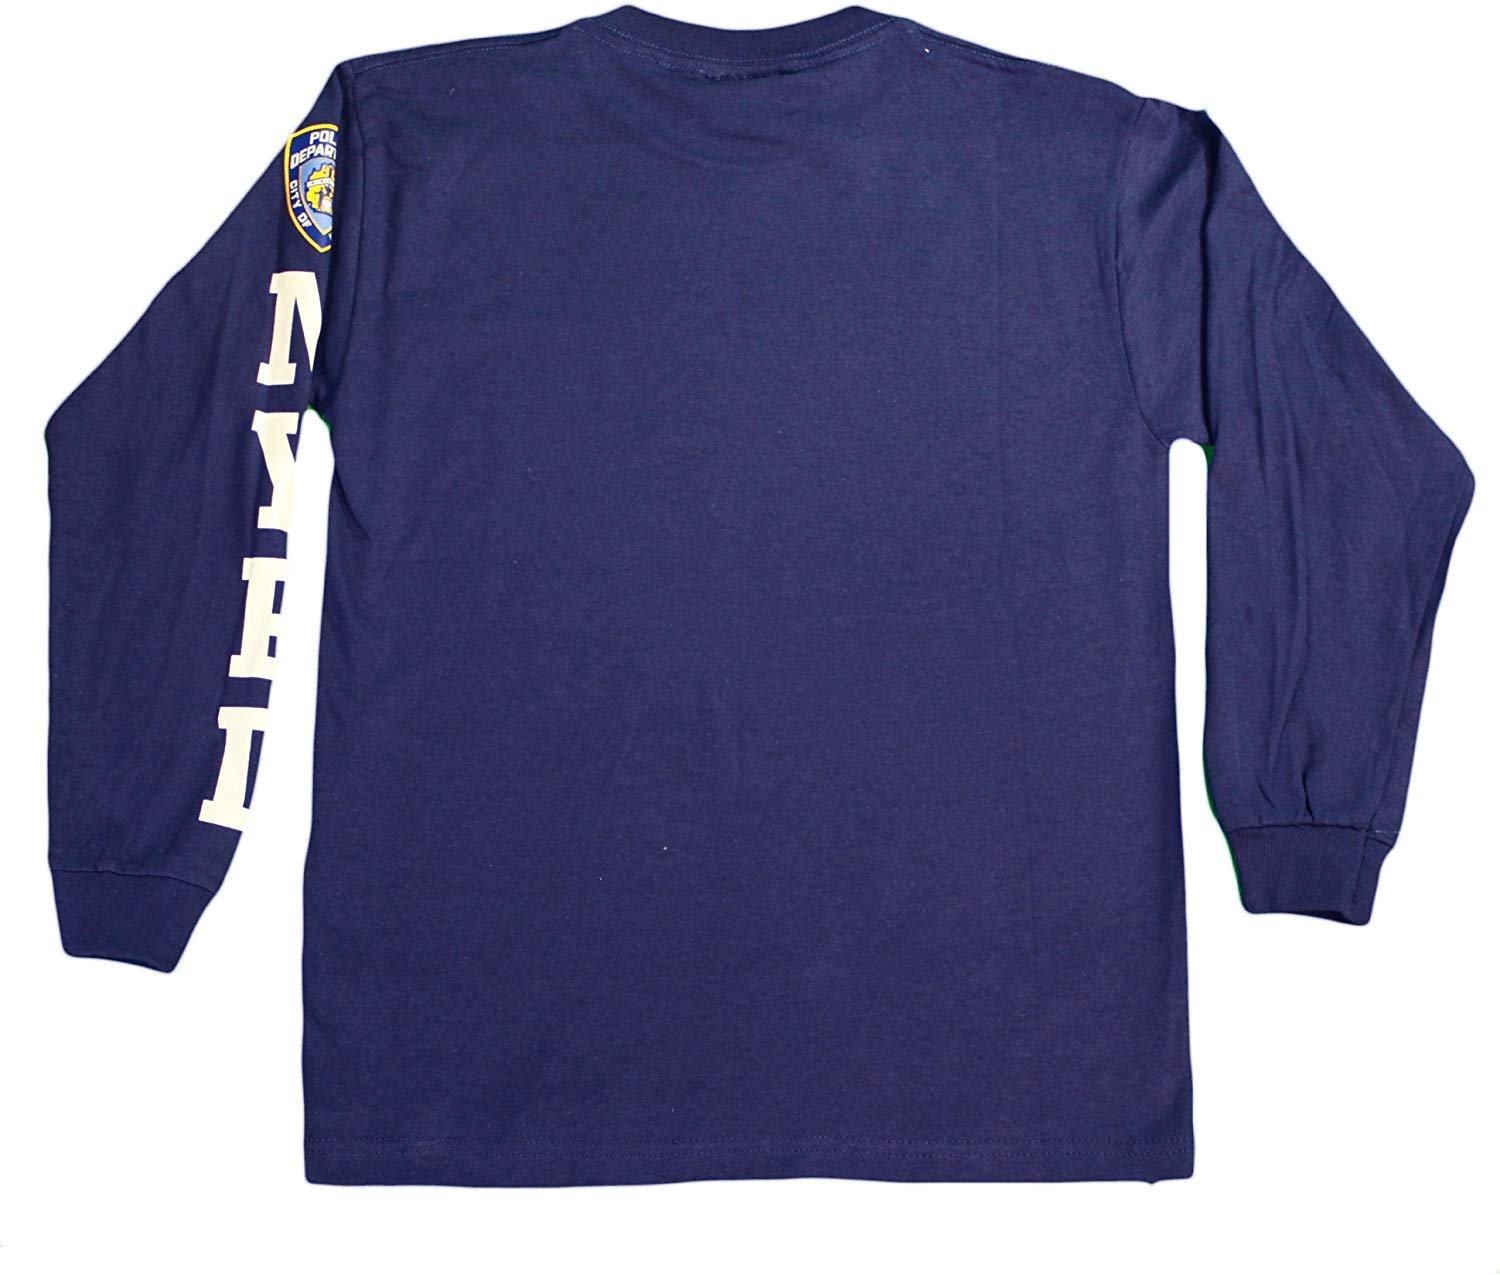 Junior NYPD Officer: Navy & White Long Sleeve Tee with Chest Badge